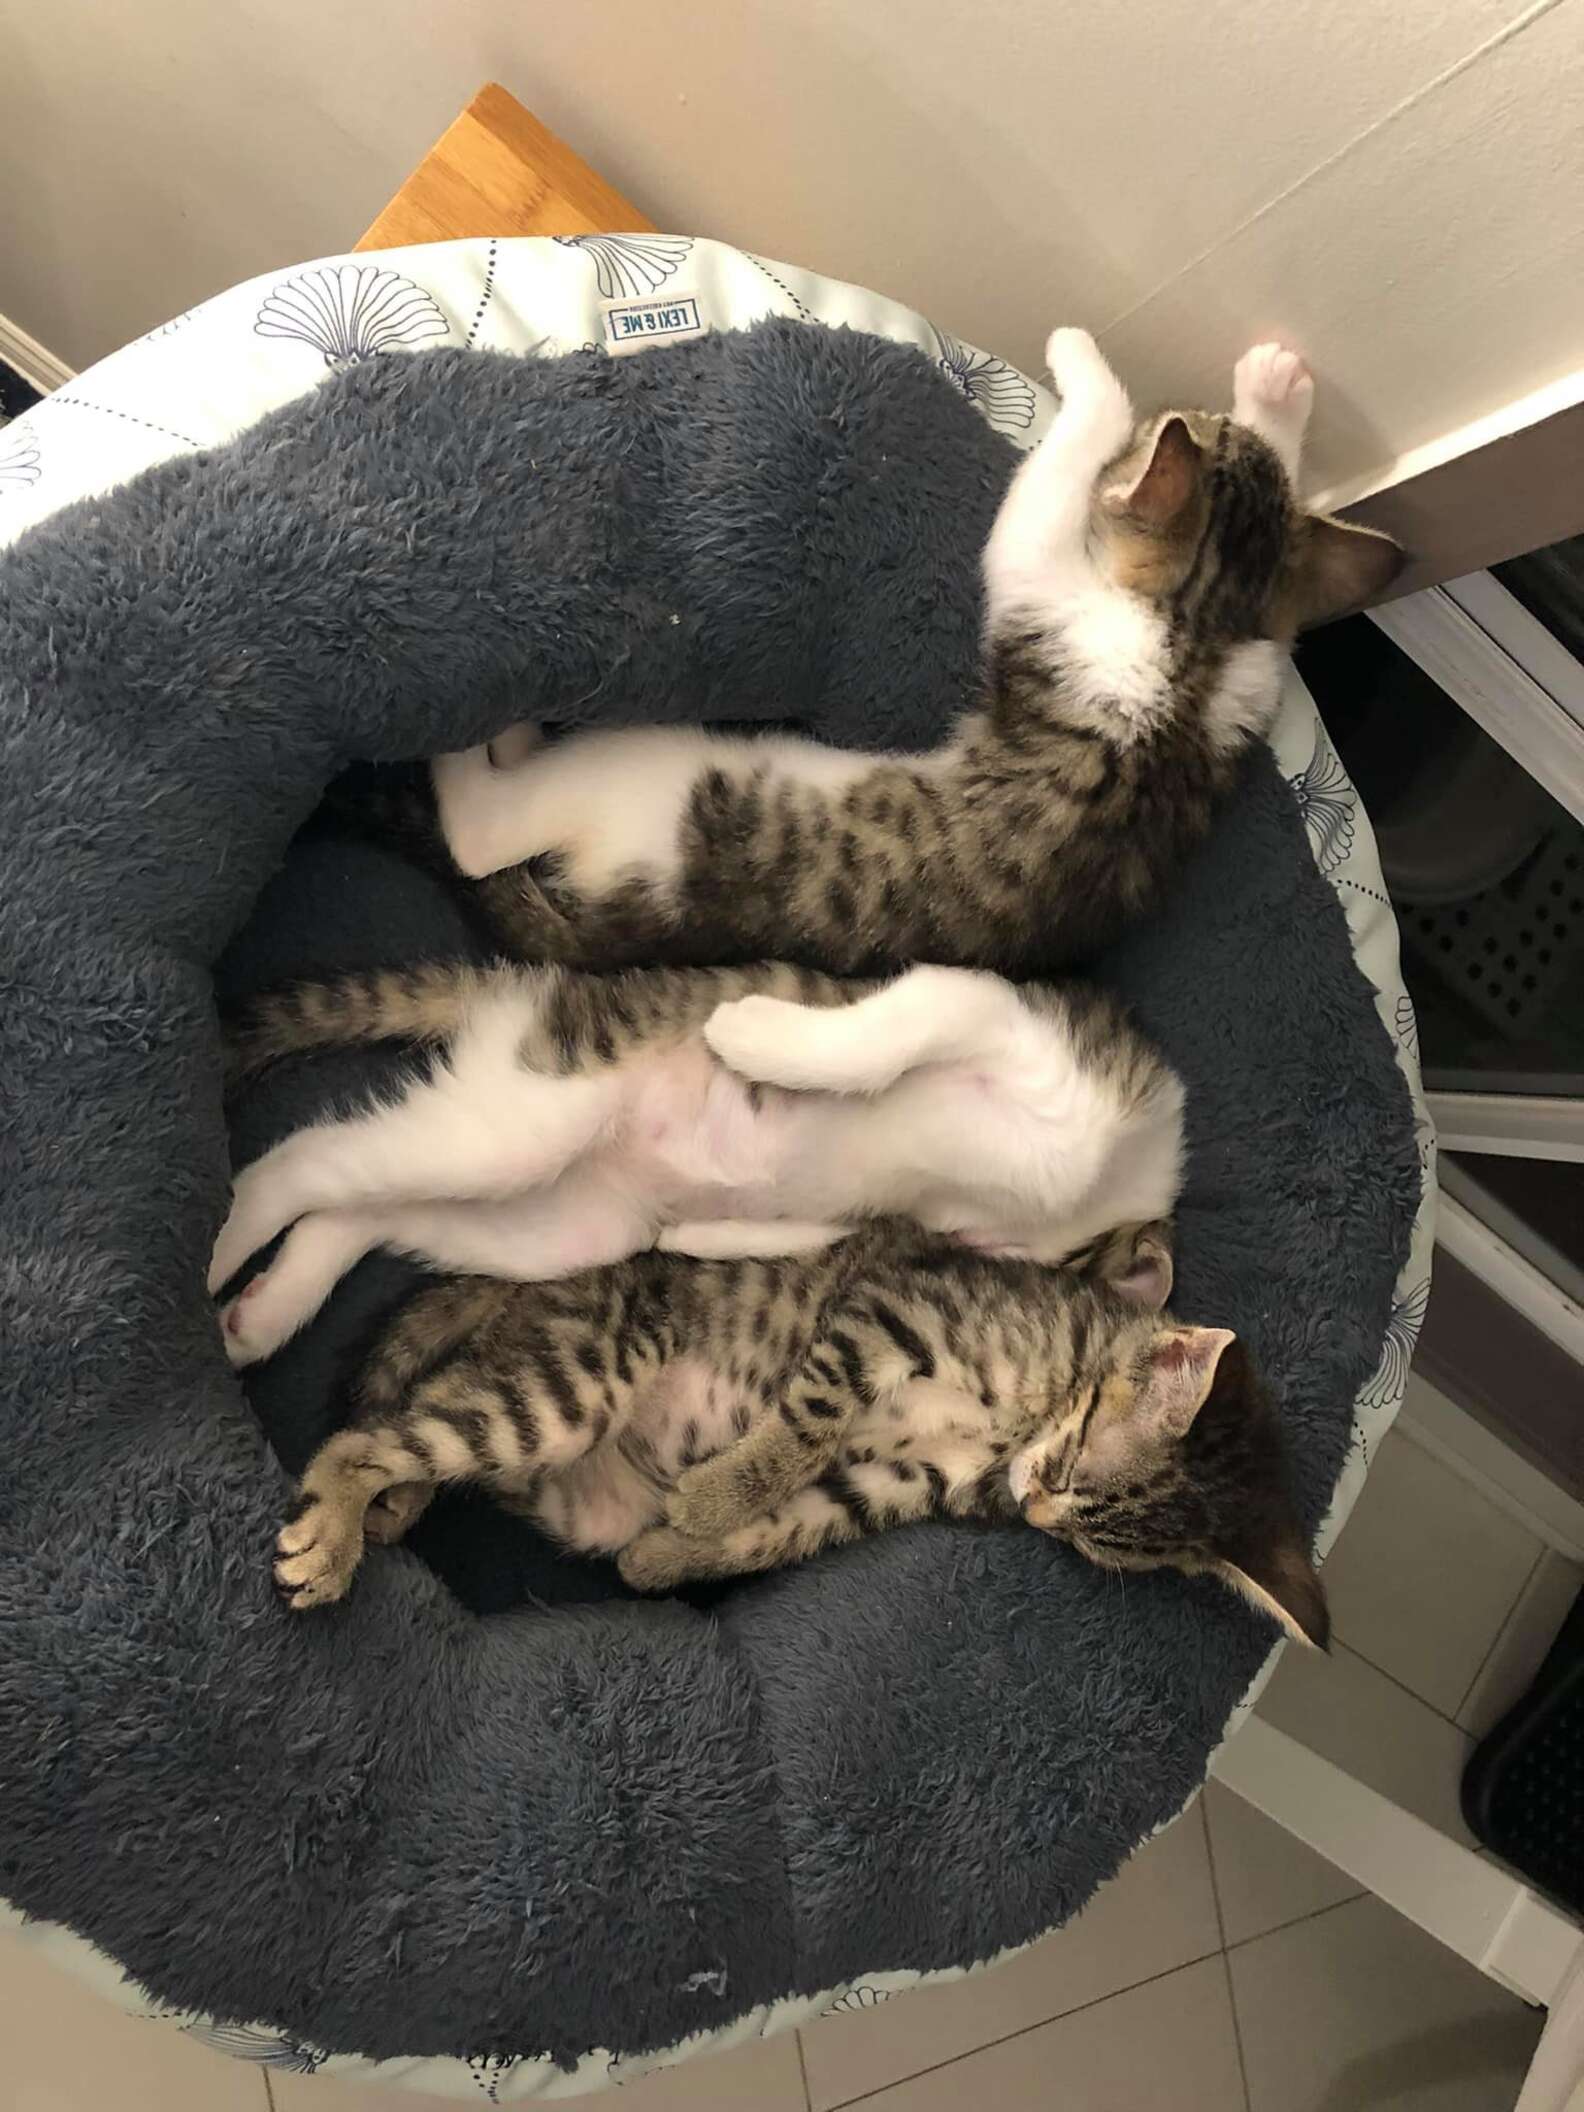 Kitten's Unusual Sleeping Position Creeps Out her Foster Parents